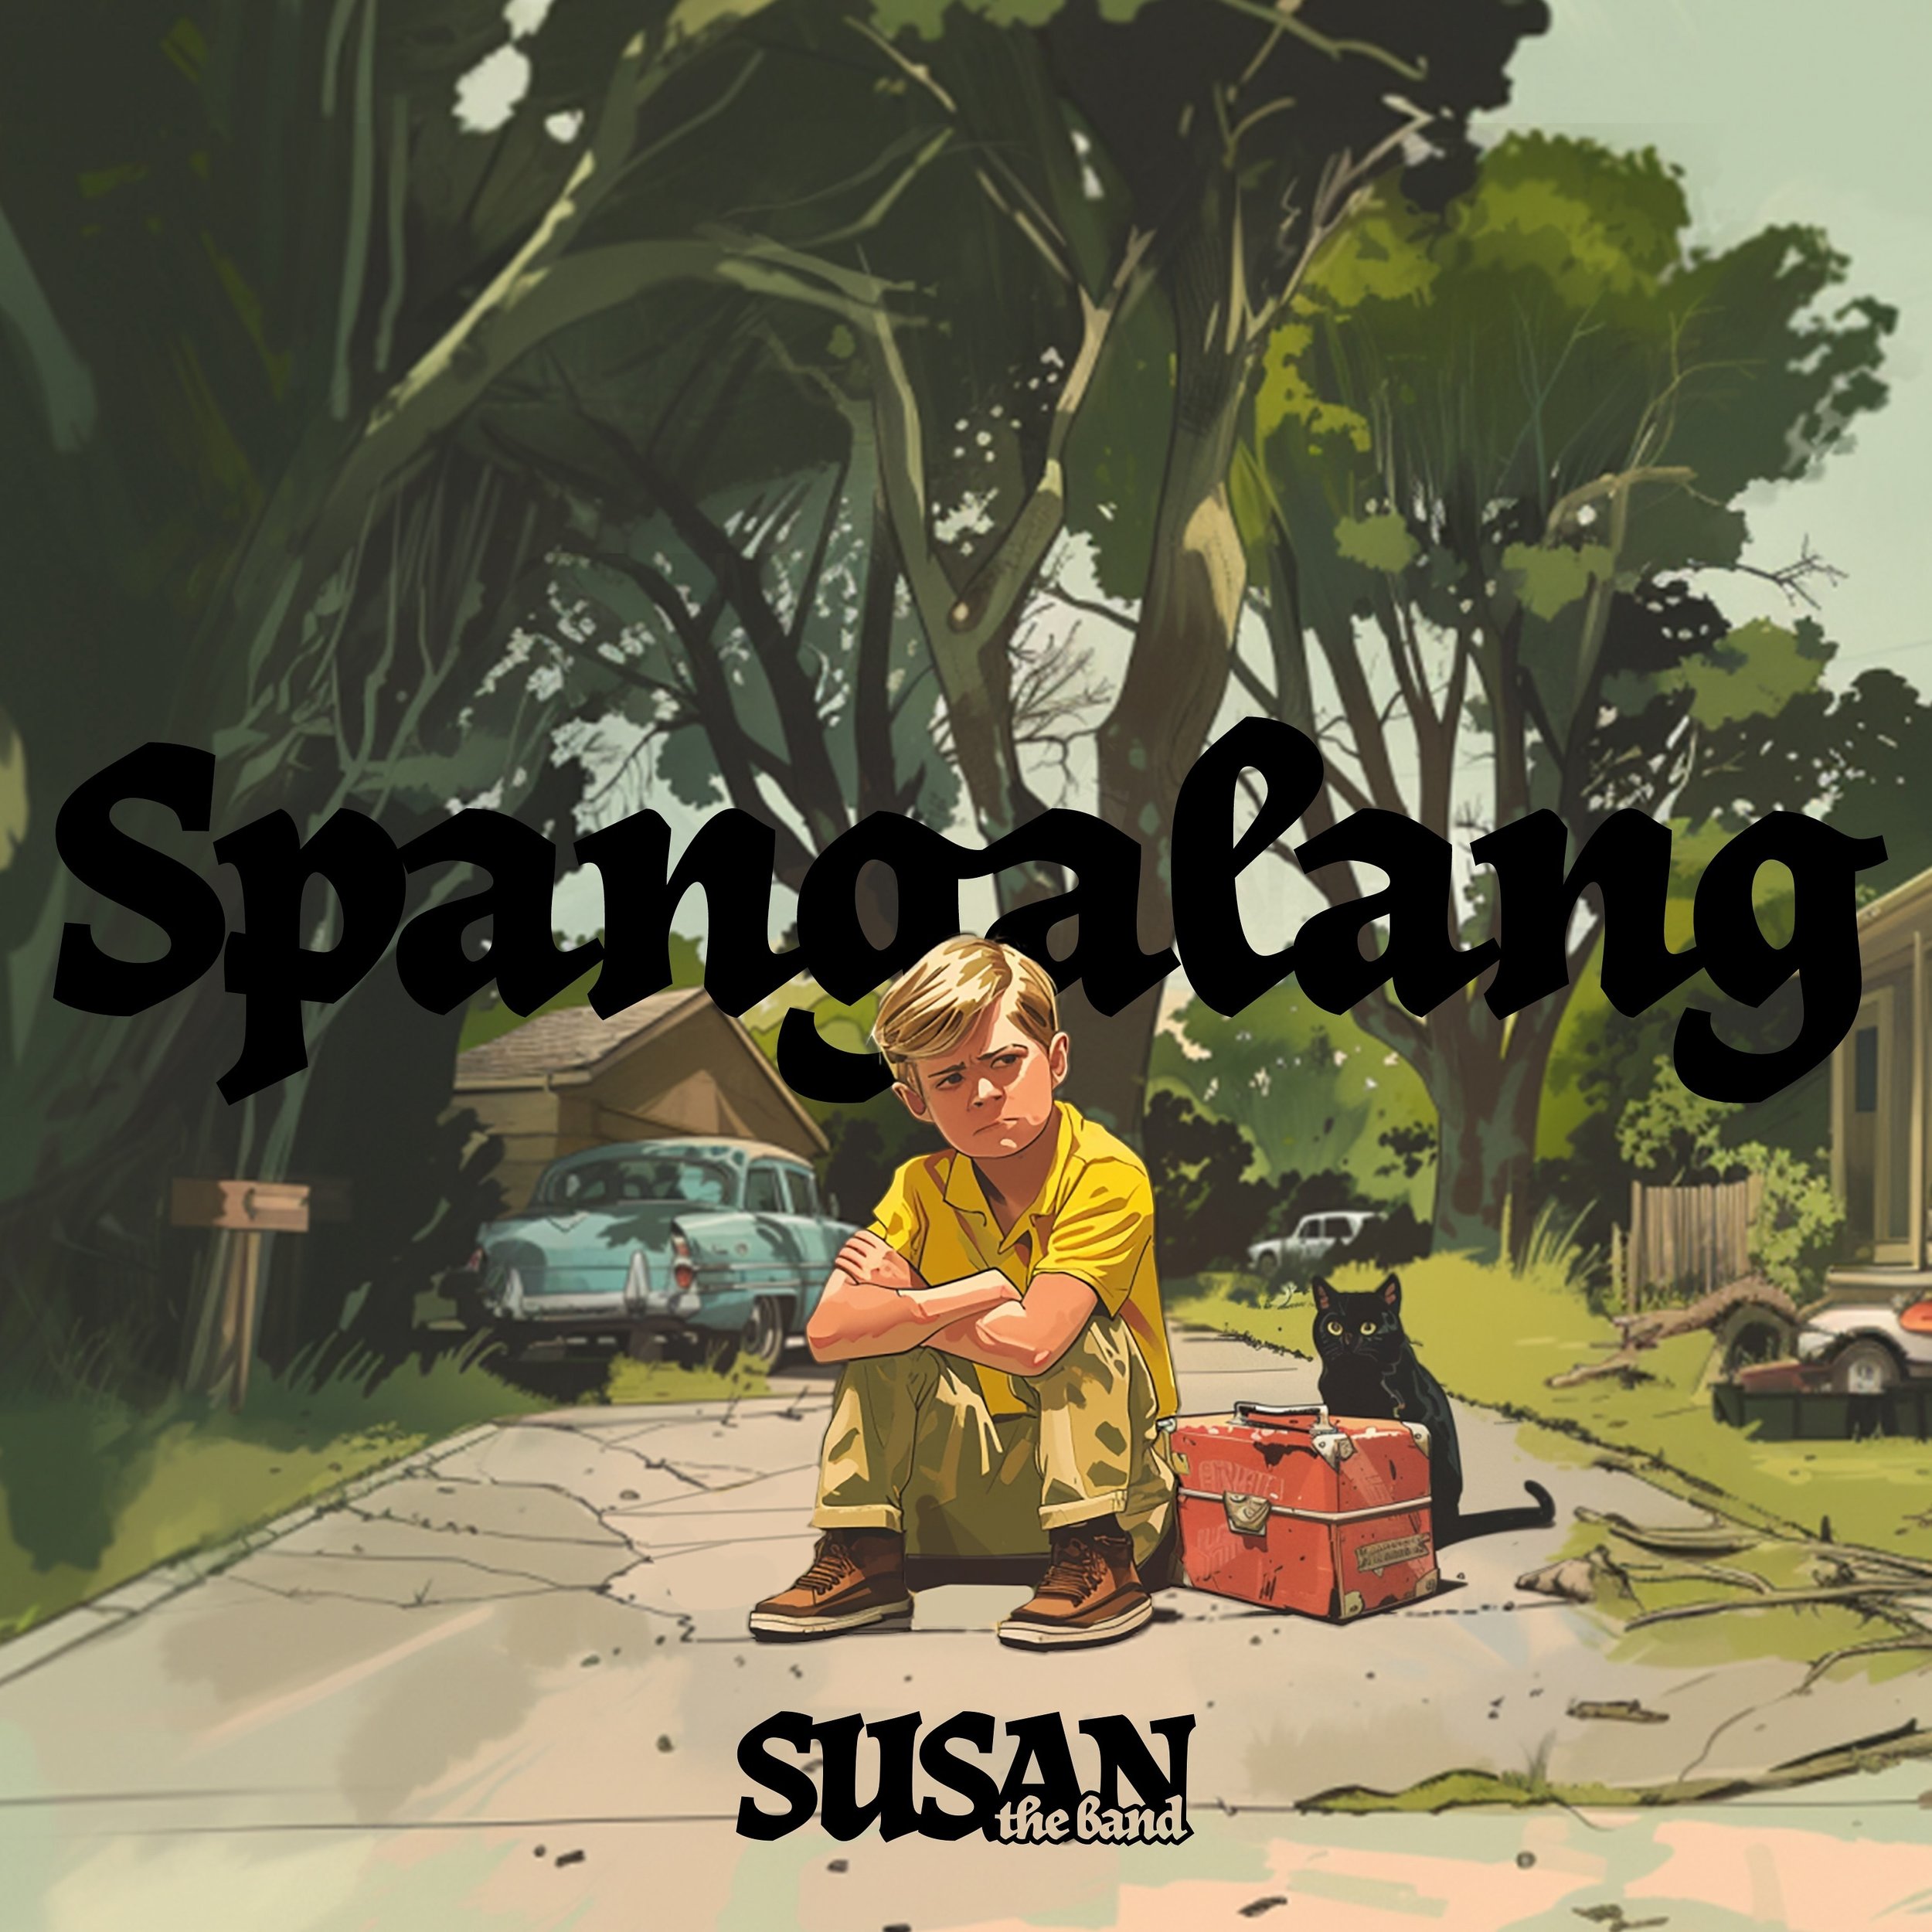 IT&rsquo;S HERE! &ldquo;Spangalang&rdquo; is out now. For all those who packed their toy suitcase, told their parents they&rsquo;re leaving then walked down the garden path to regret the entire thing. &ldquo;Where will your childish anger lead you? H